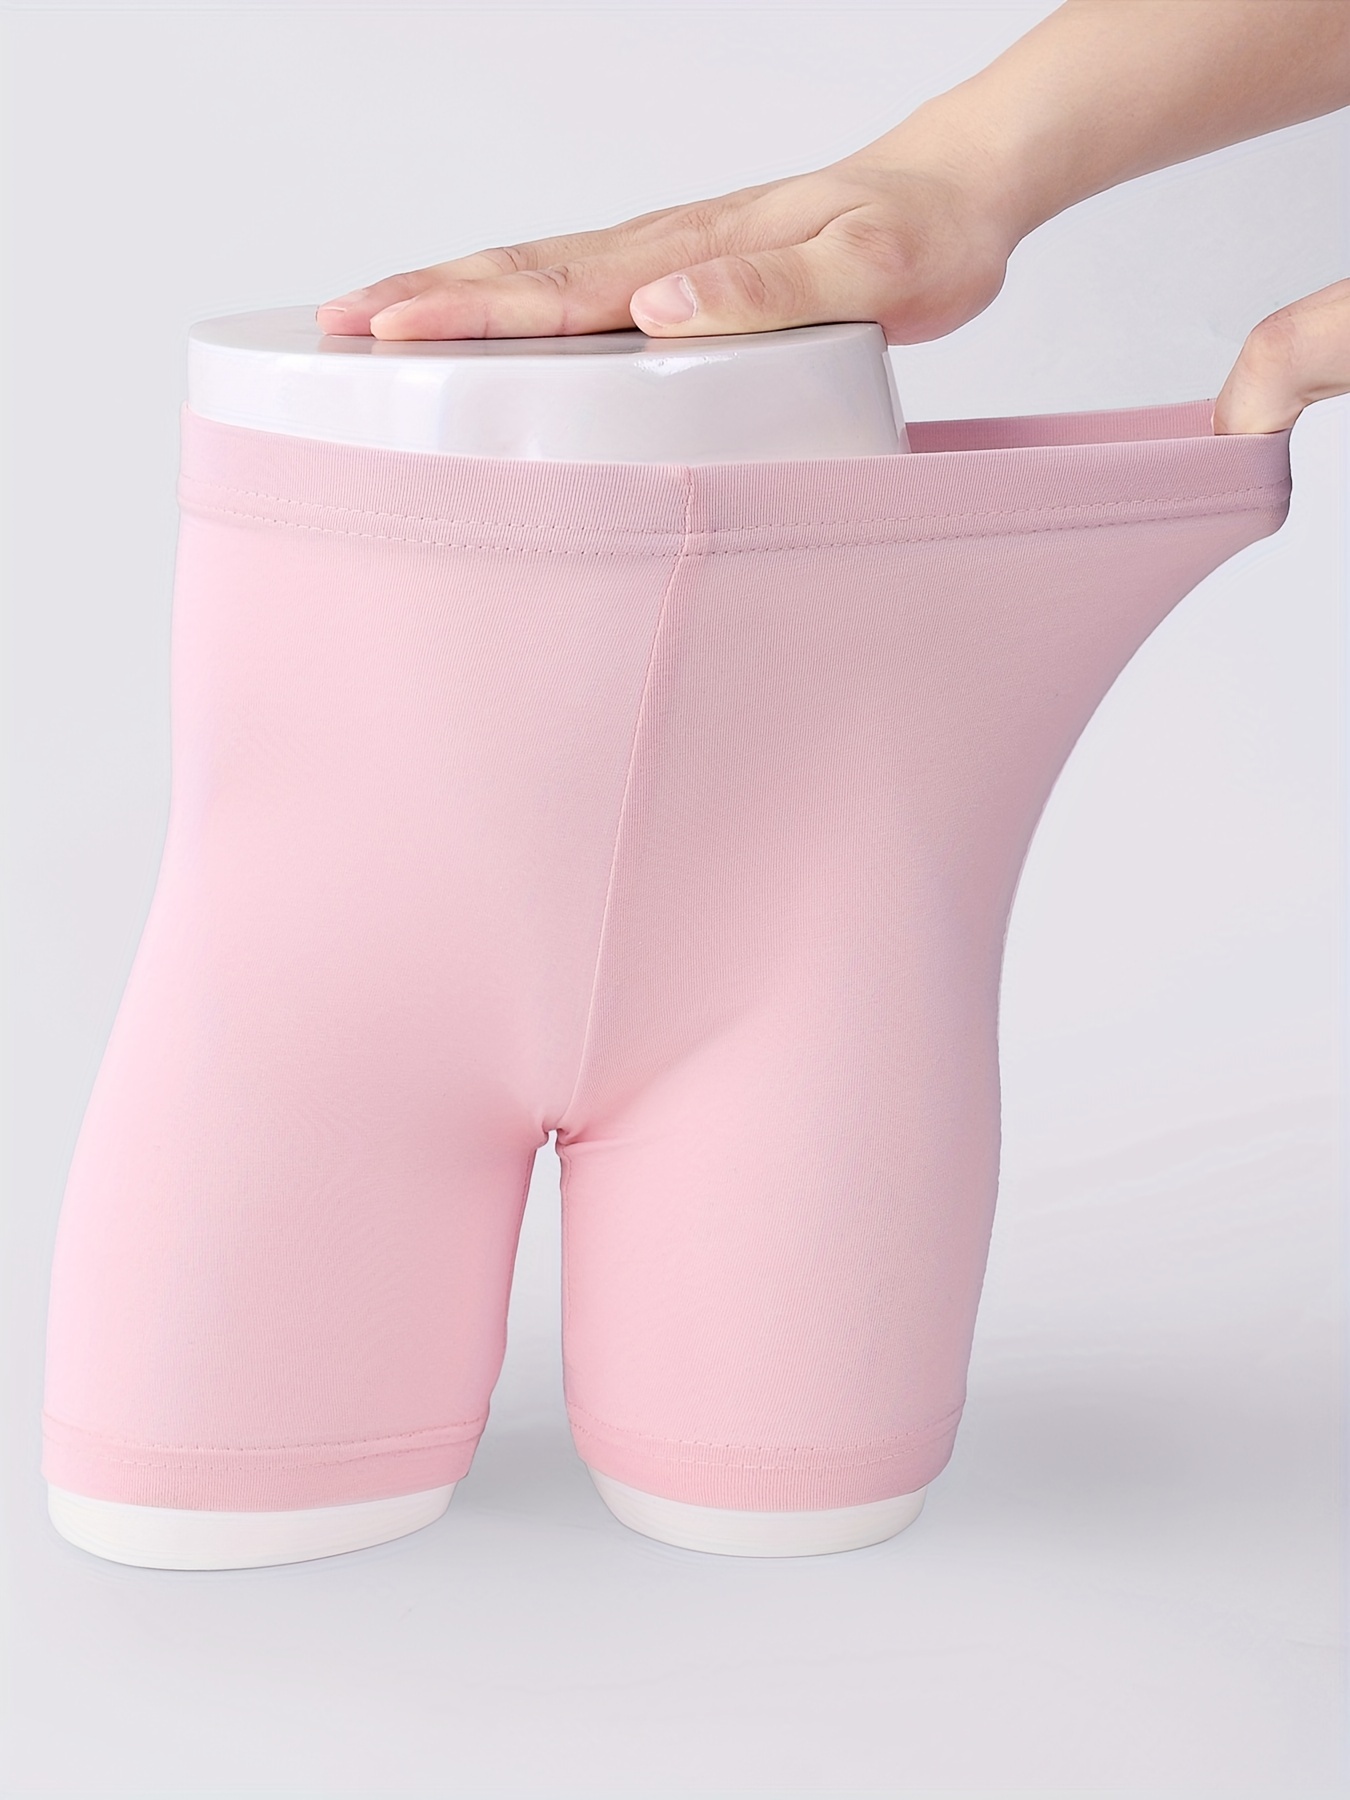 Modesty shorts for 4 year old girls?